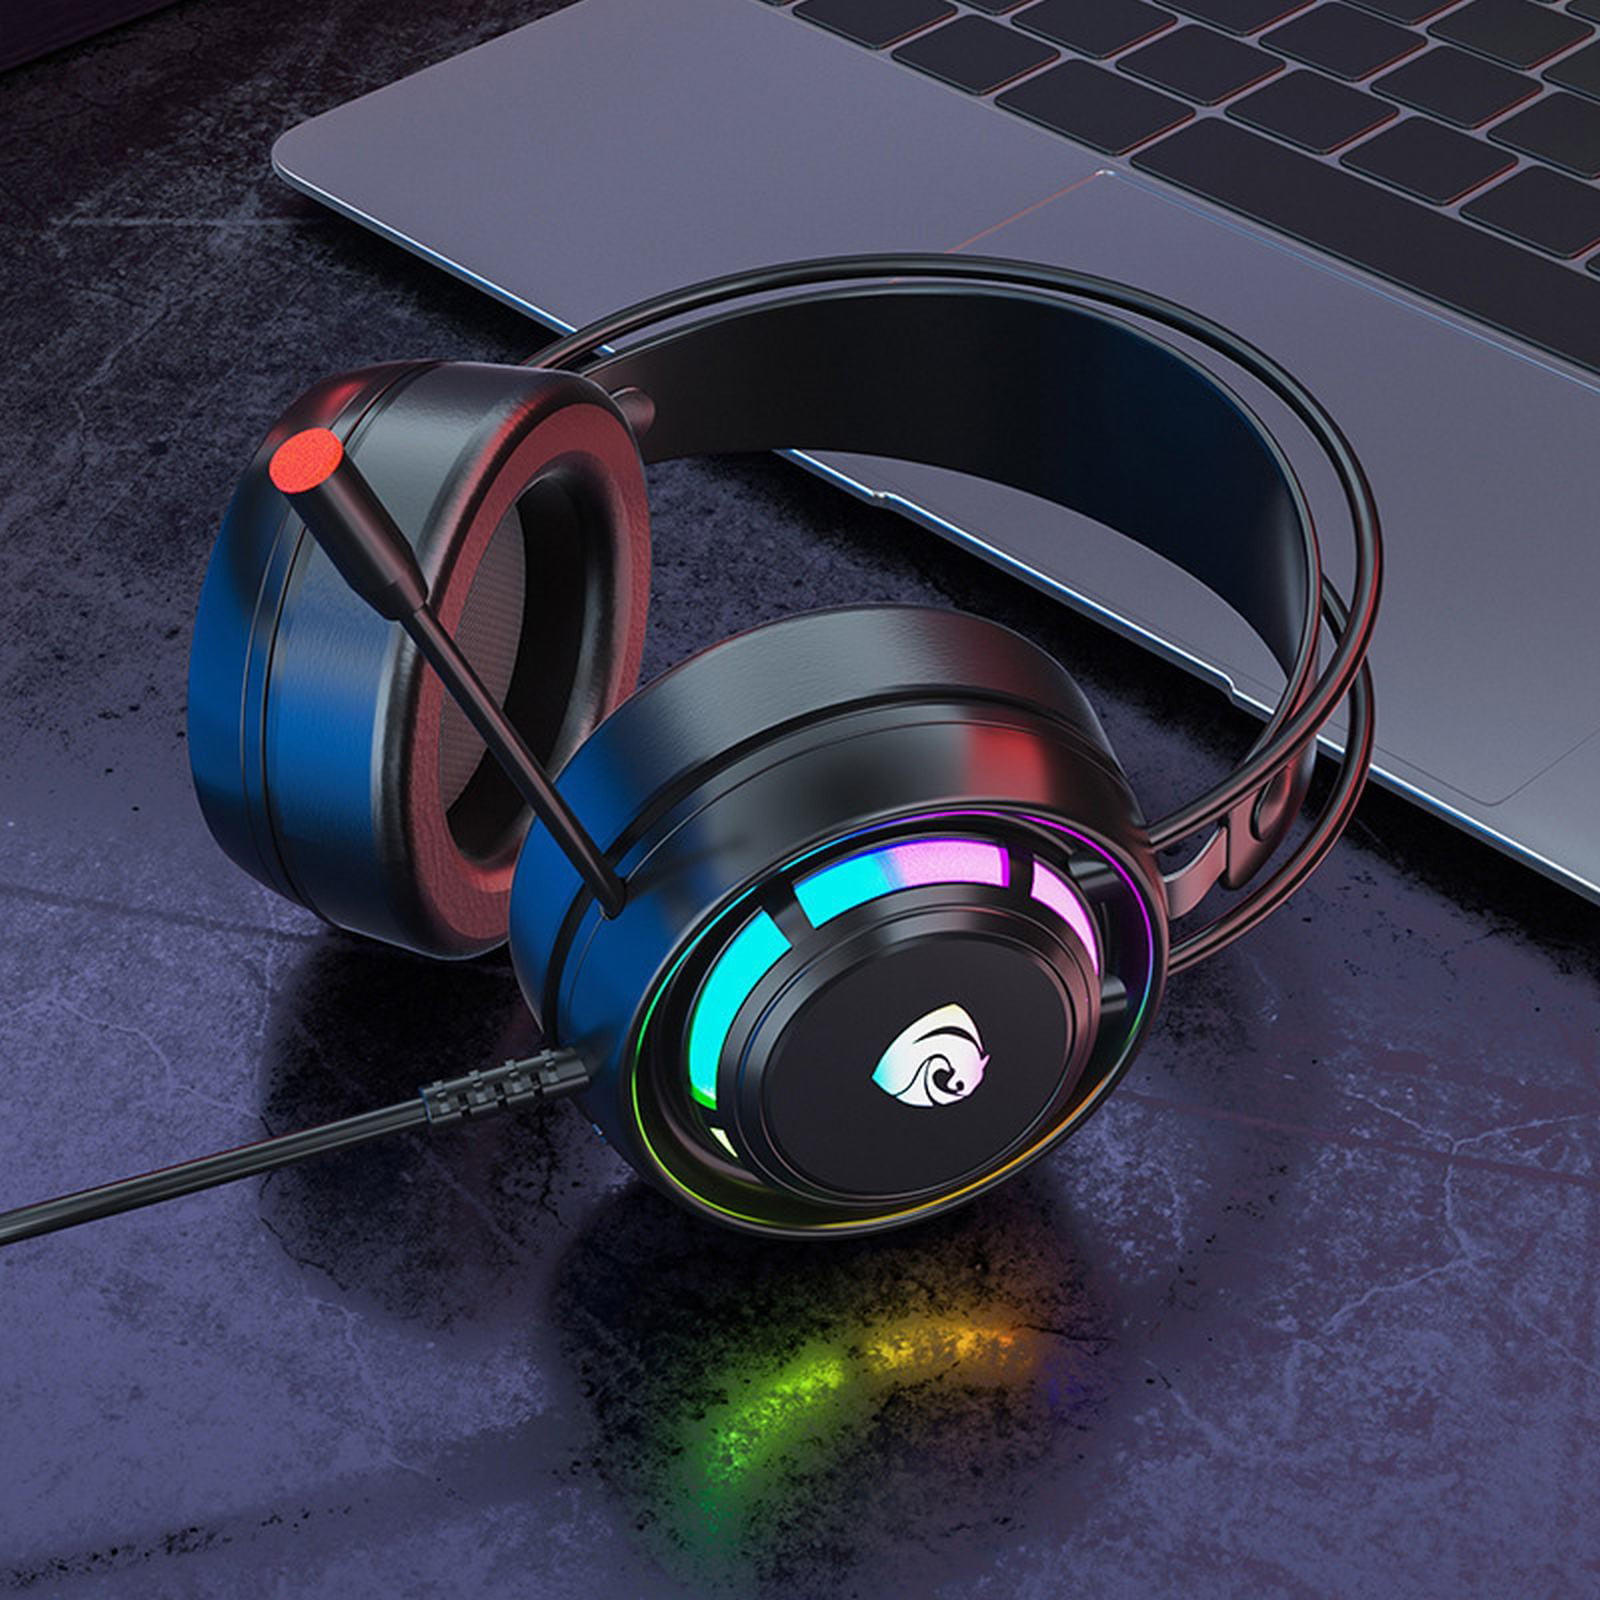 Ykohkofe Comfortable Gaming Wired Headset. Headphones With